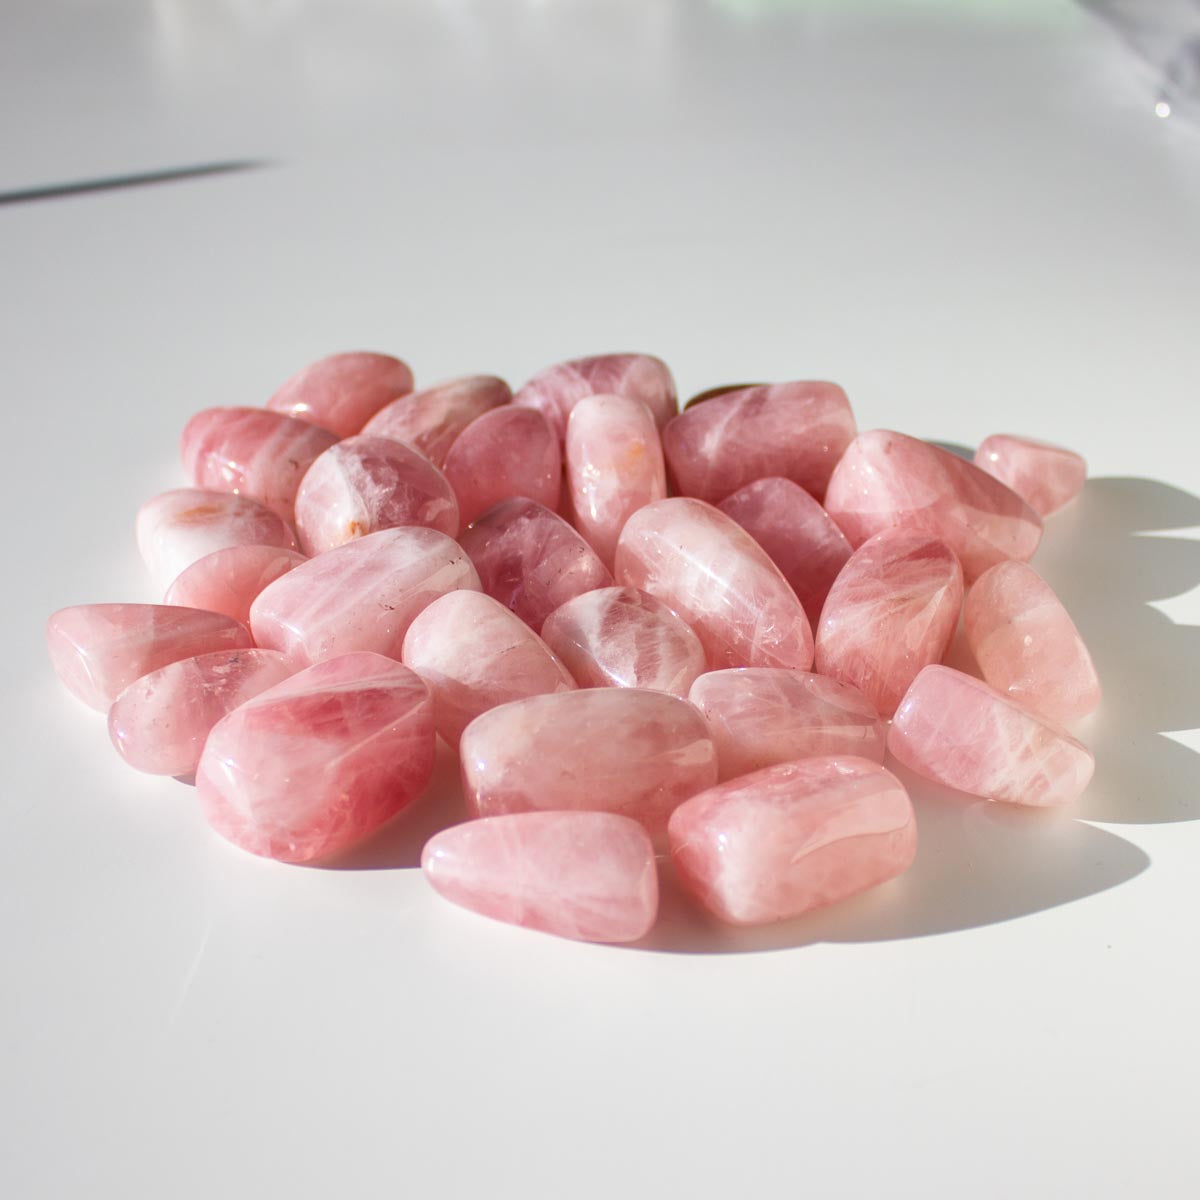 Ethical Rose Quartz Healing Crystal for Love, Relationships, and Peace